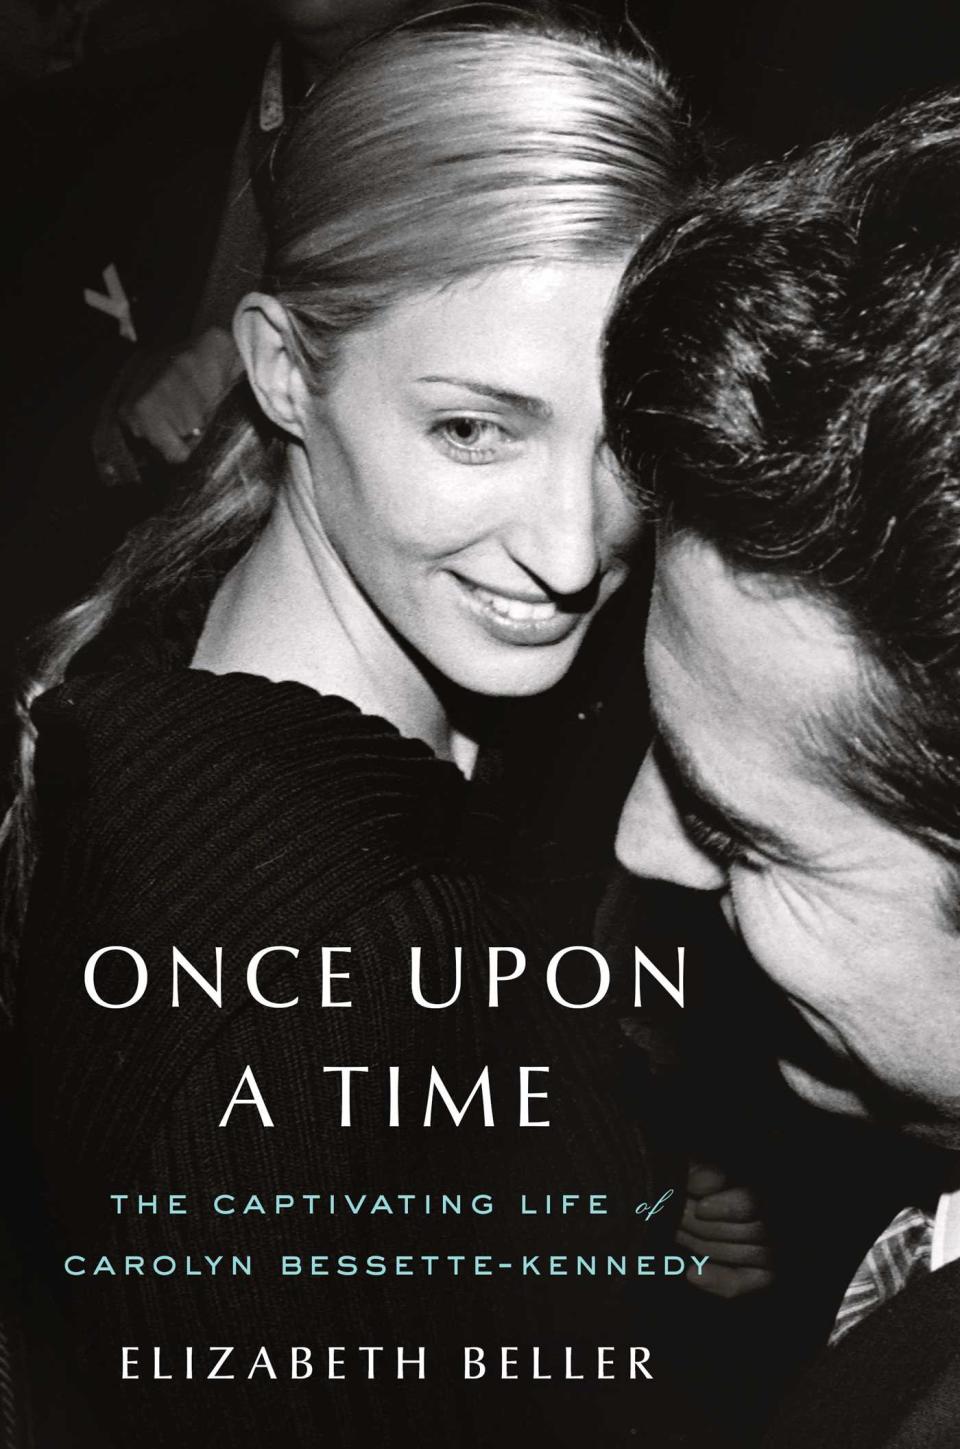 Once Upon a Time
The Captivating Life of Carolyn Bessette-Kennedy